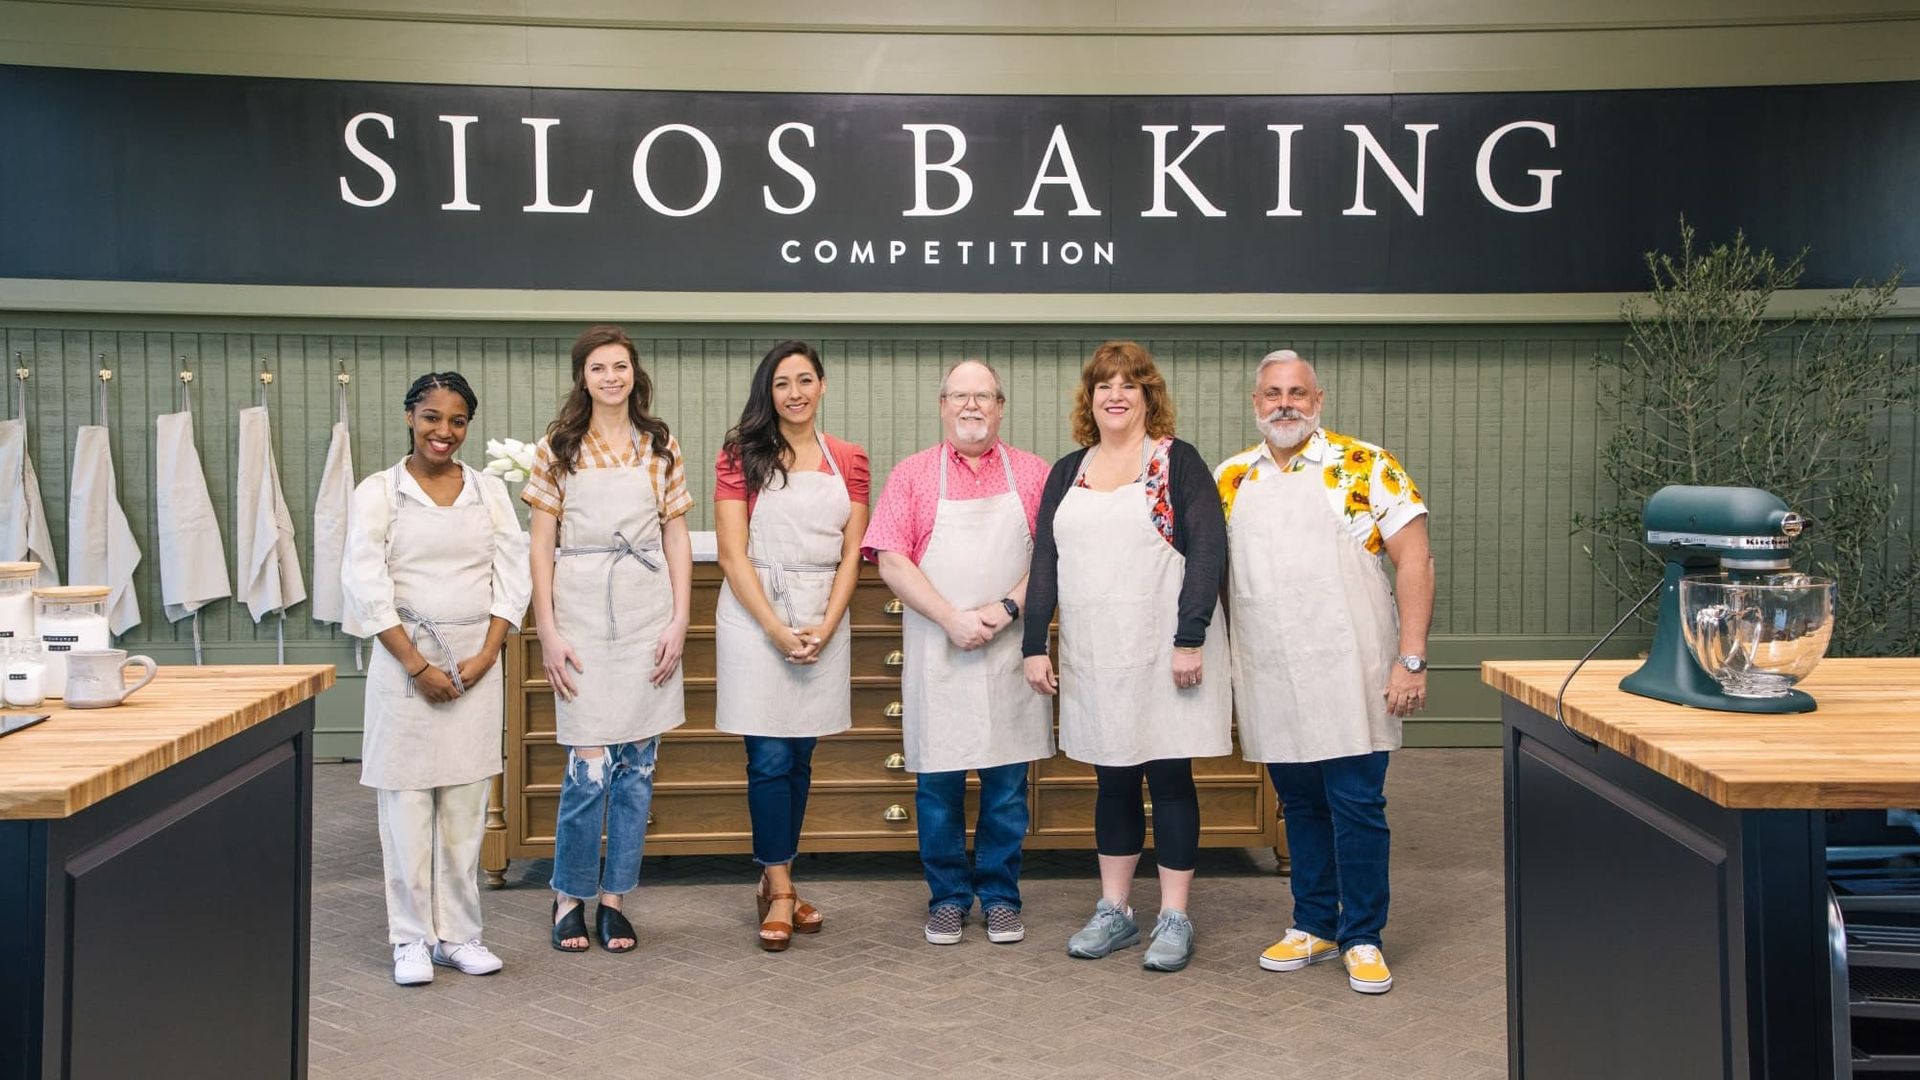 Silos Baking Competition background